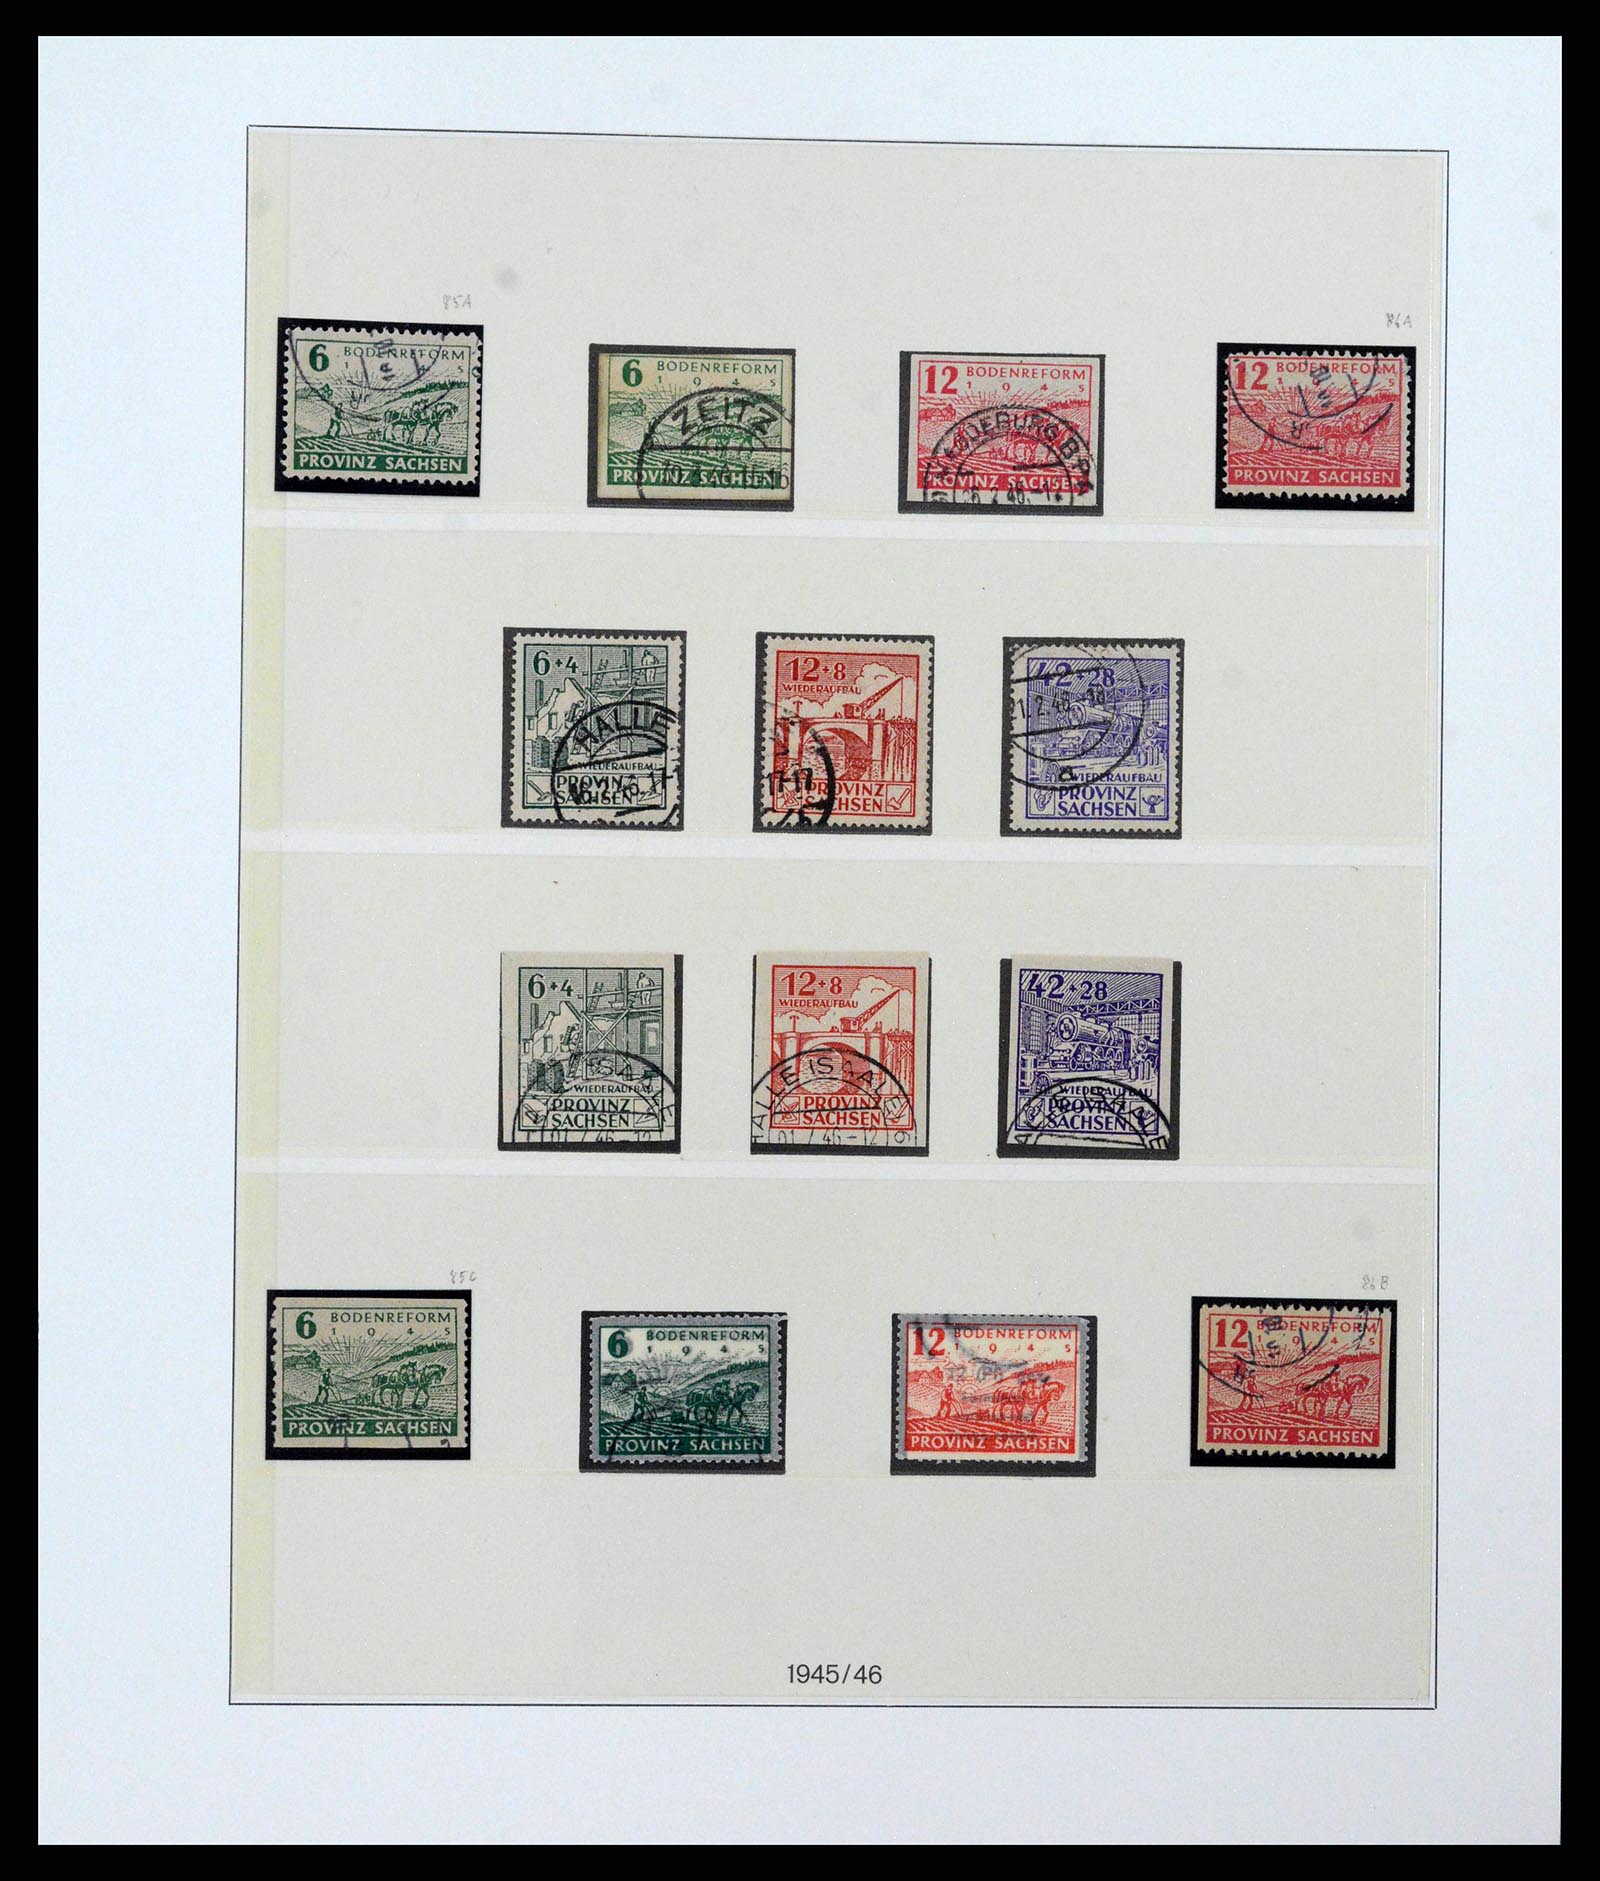 38890 0016 - Stamp collection 38890 Germany sovjet zone 1945-1949.